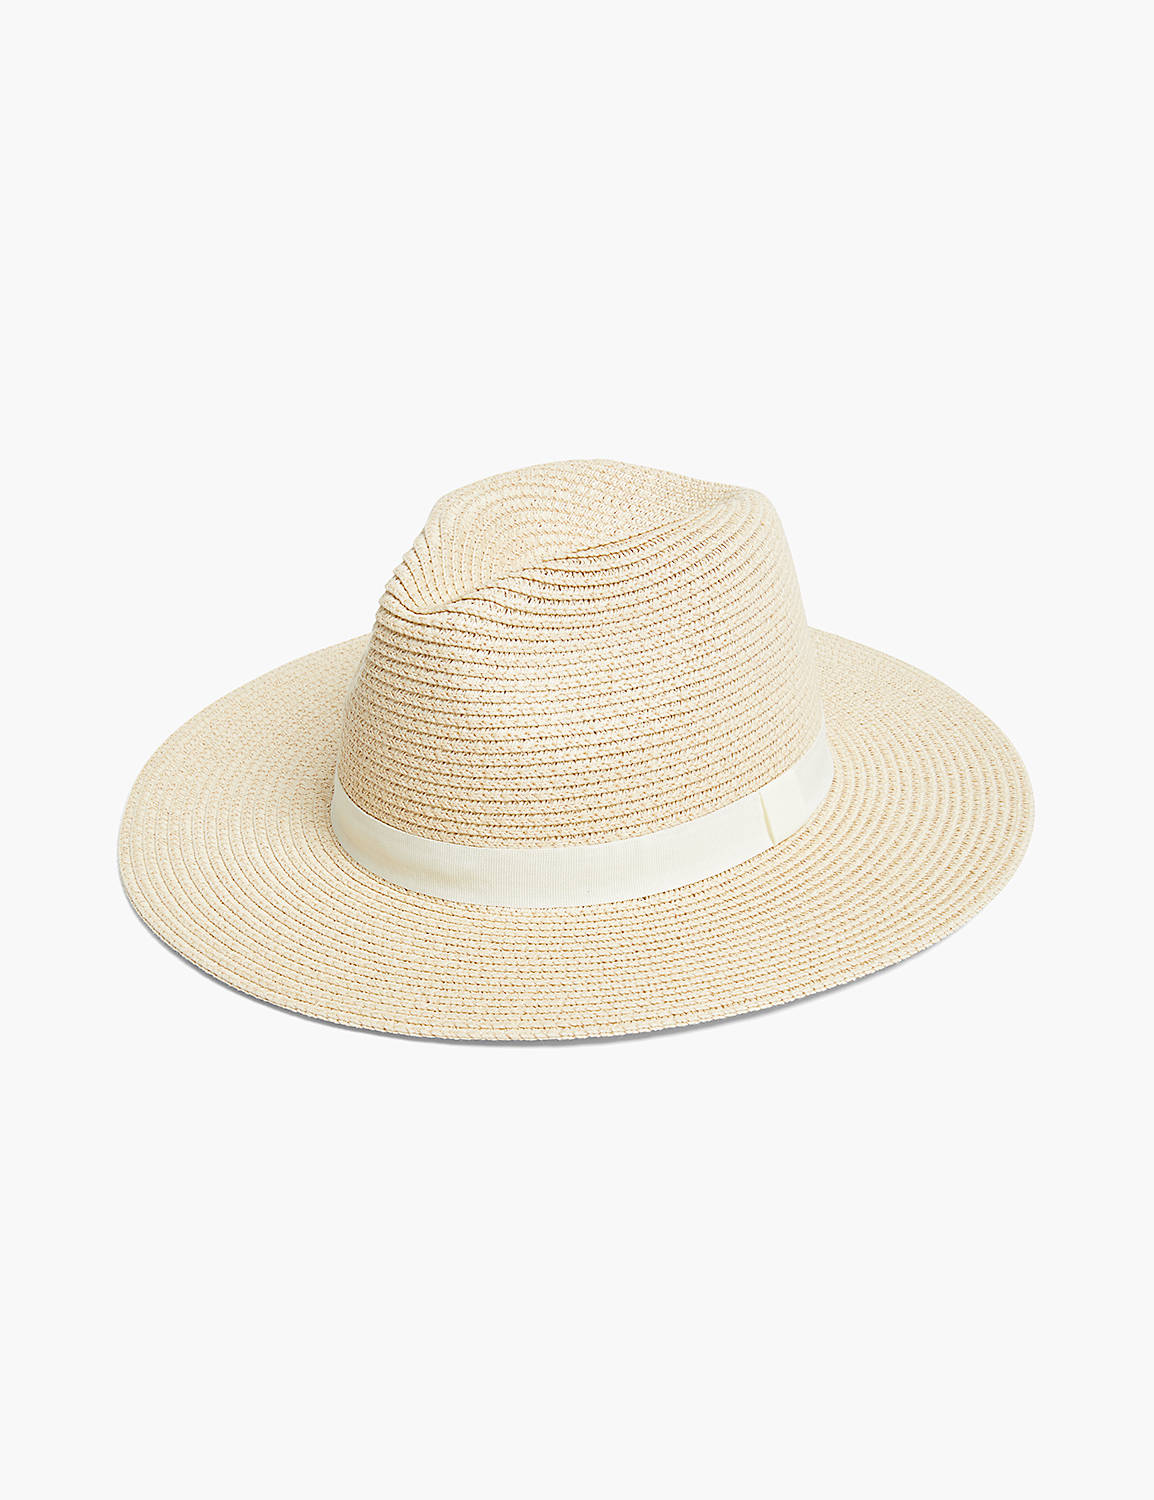 1141573 TRADITIONAL FEDORA HAT Product Image 1